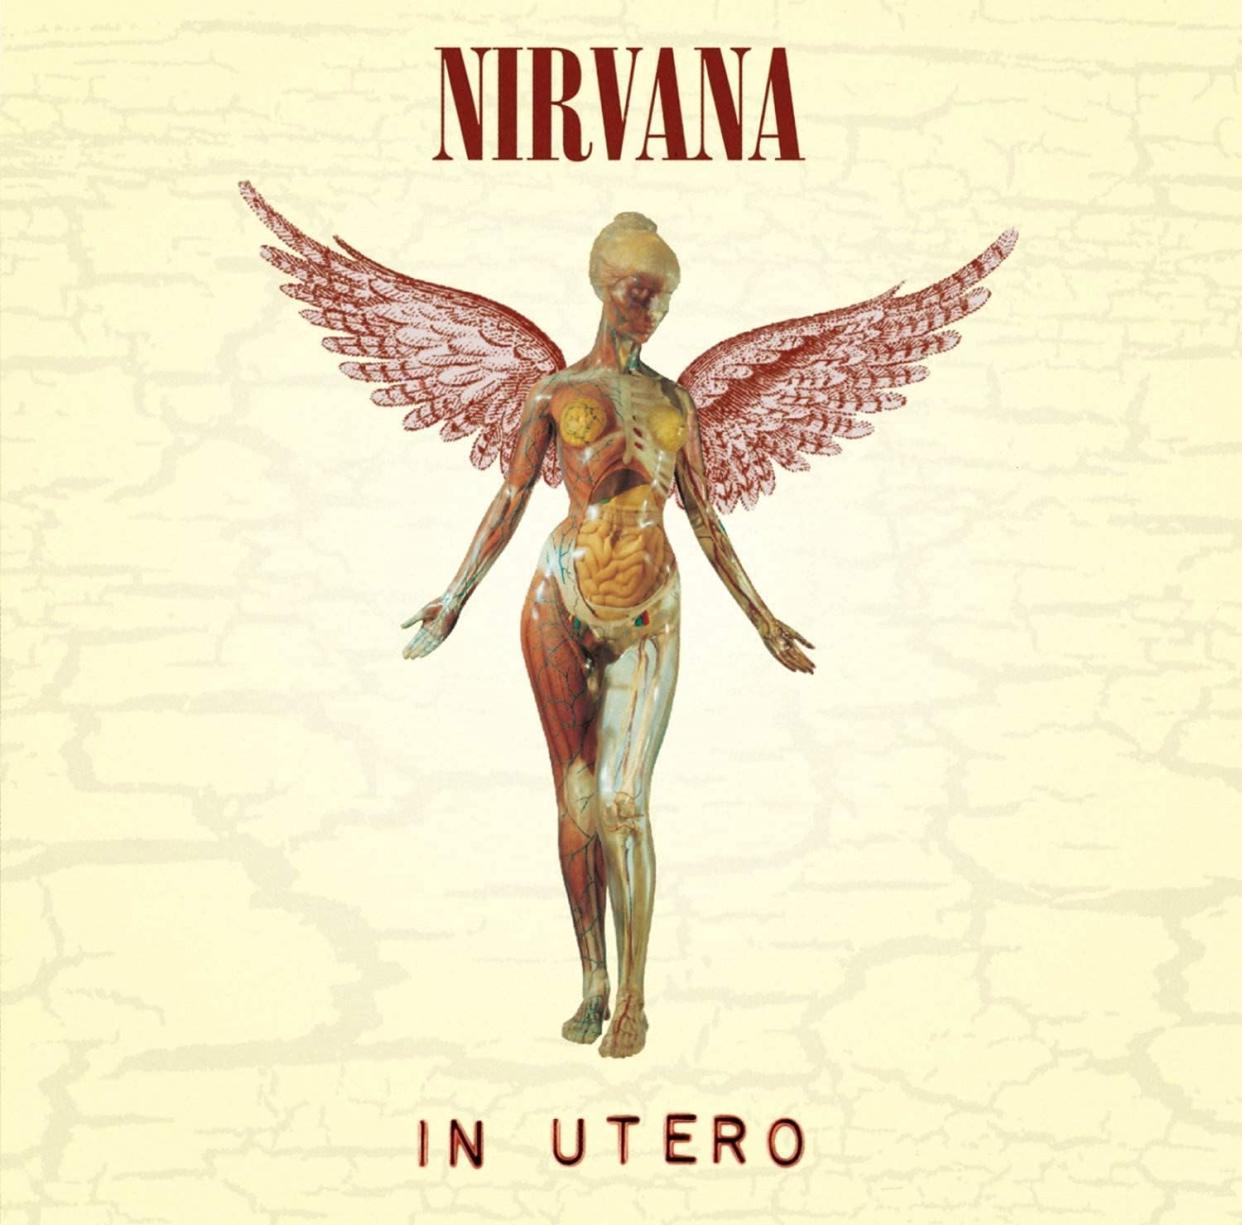 Nirvana Expands 'In Utero' For 30th Anniversary Edition